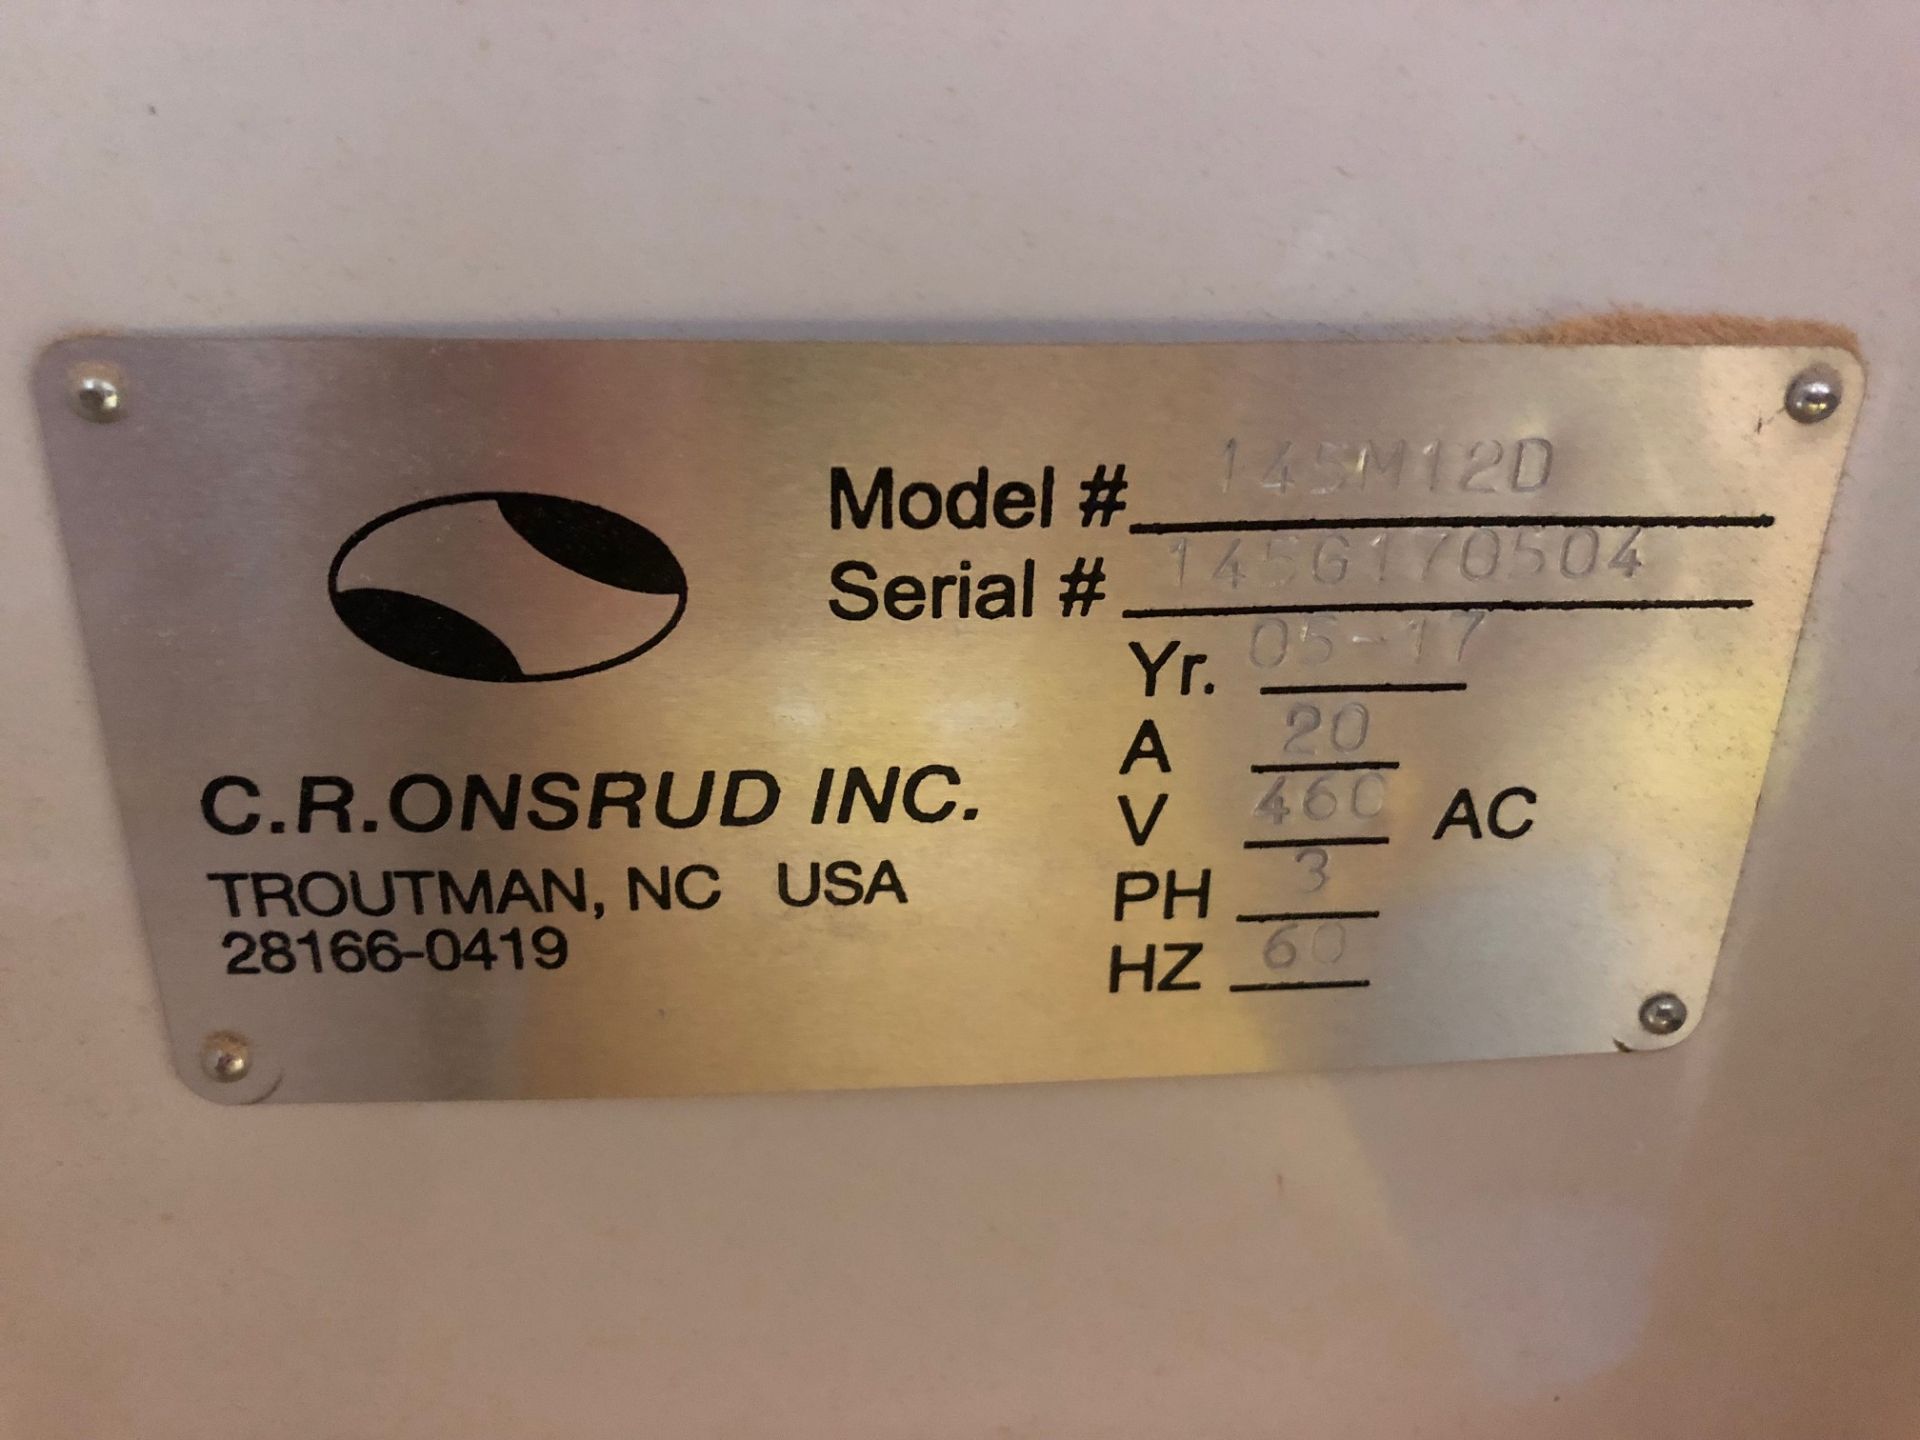 2017 C.R. Onsrud model 145M12D, s/n 145G170504, 460 V 3 phase, M-Series, CNC router, like new - Image 8 of 9